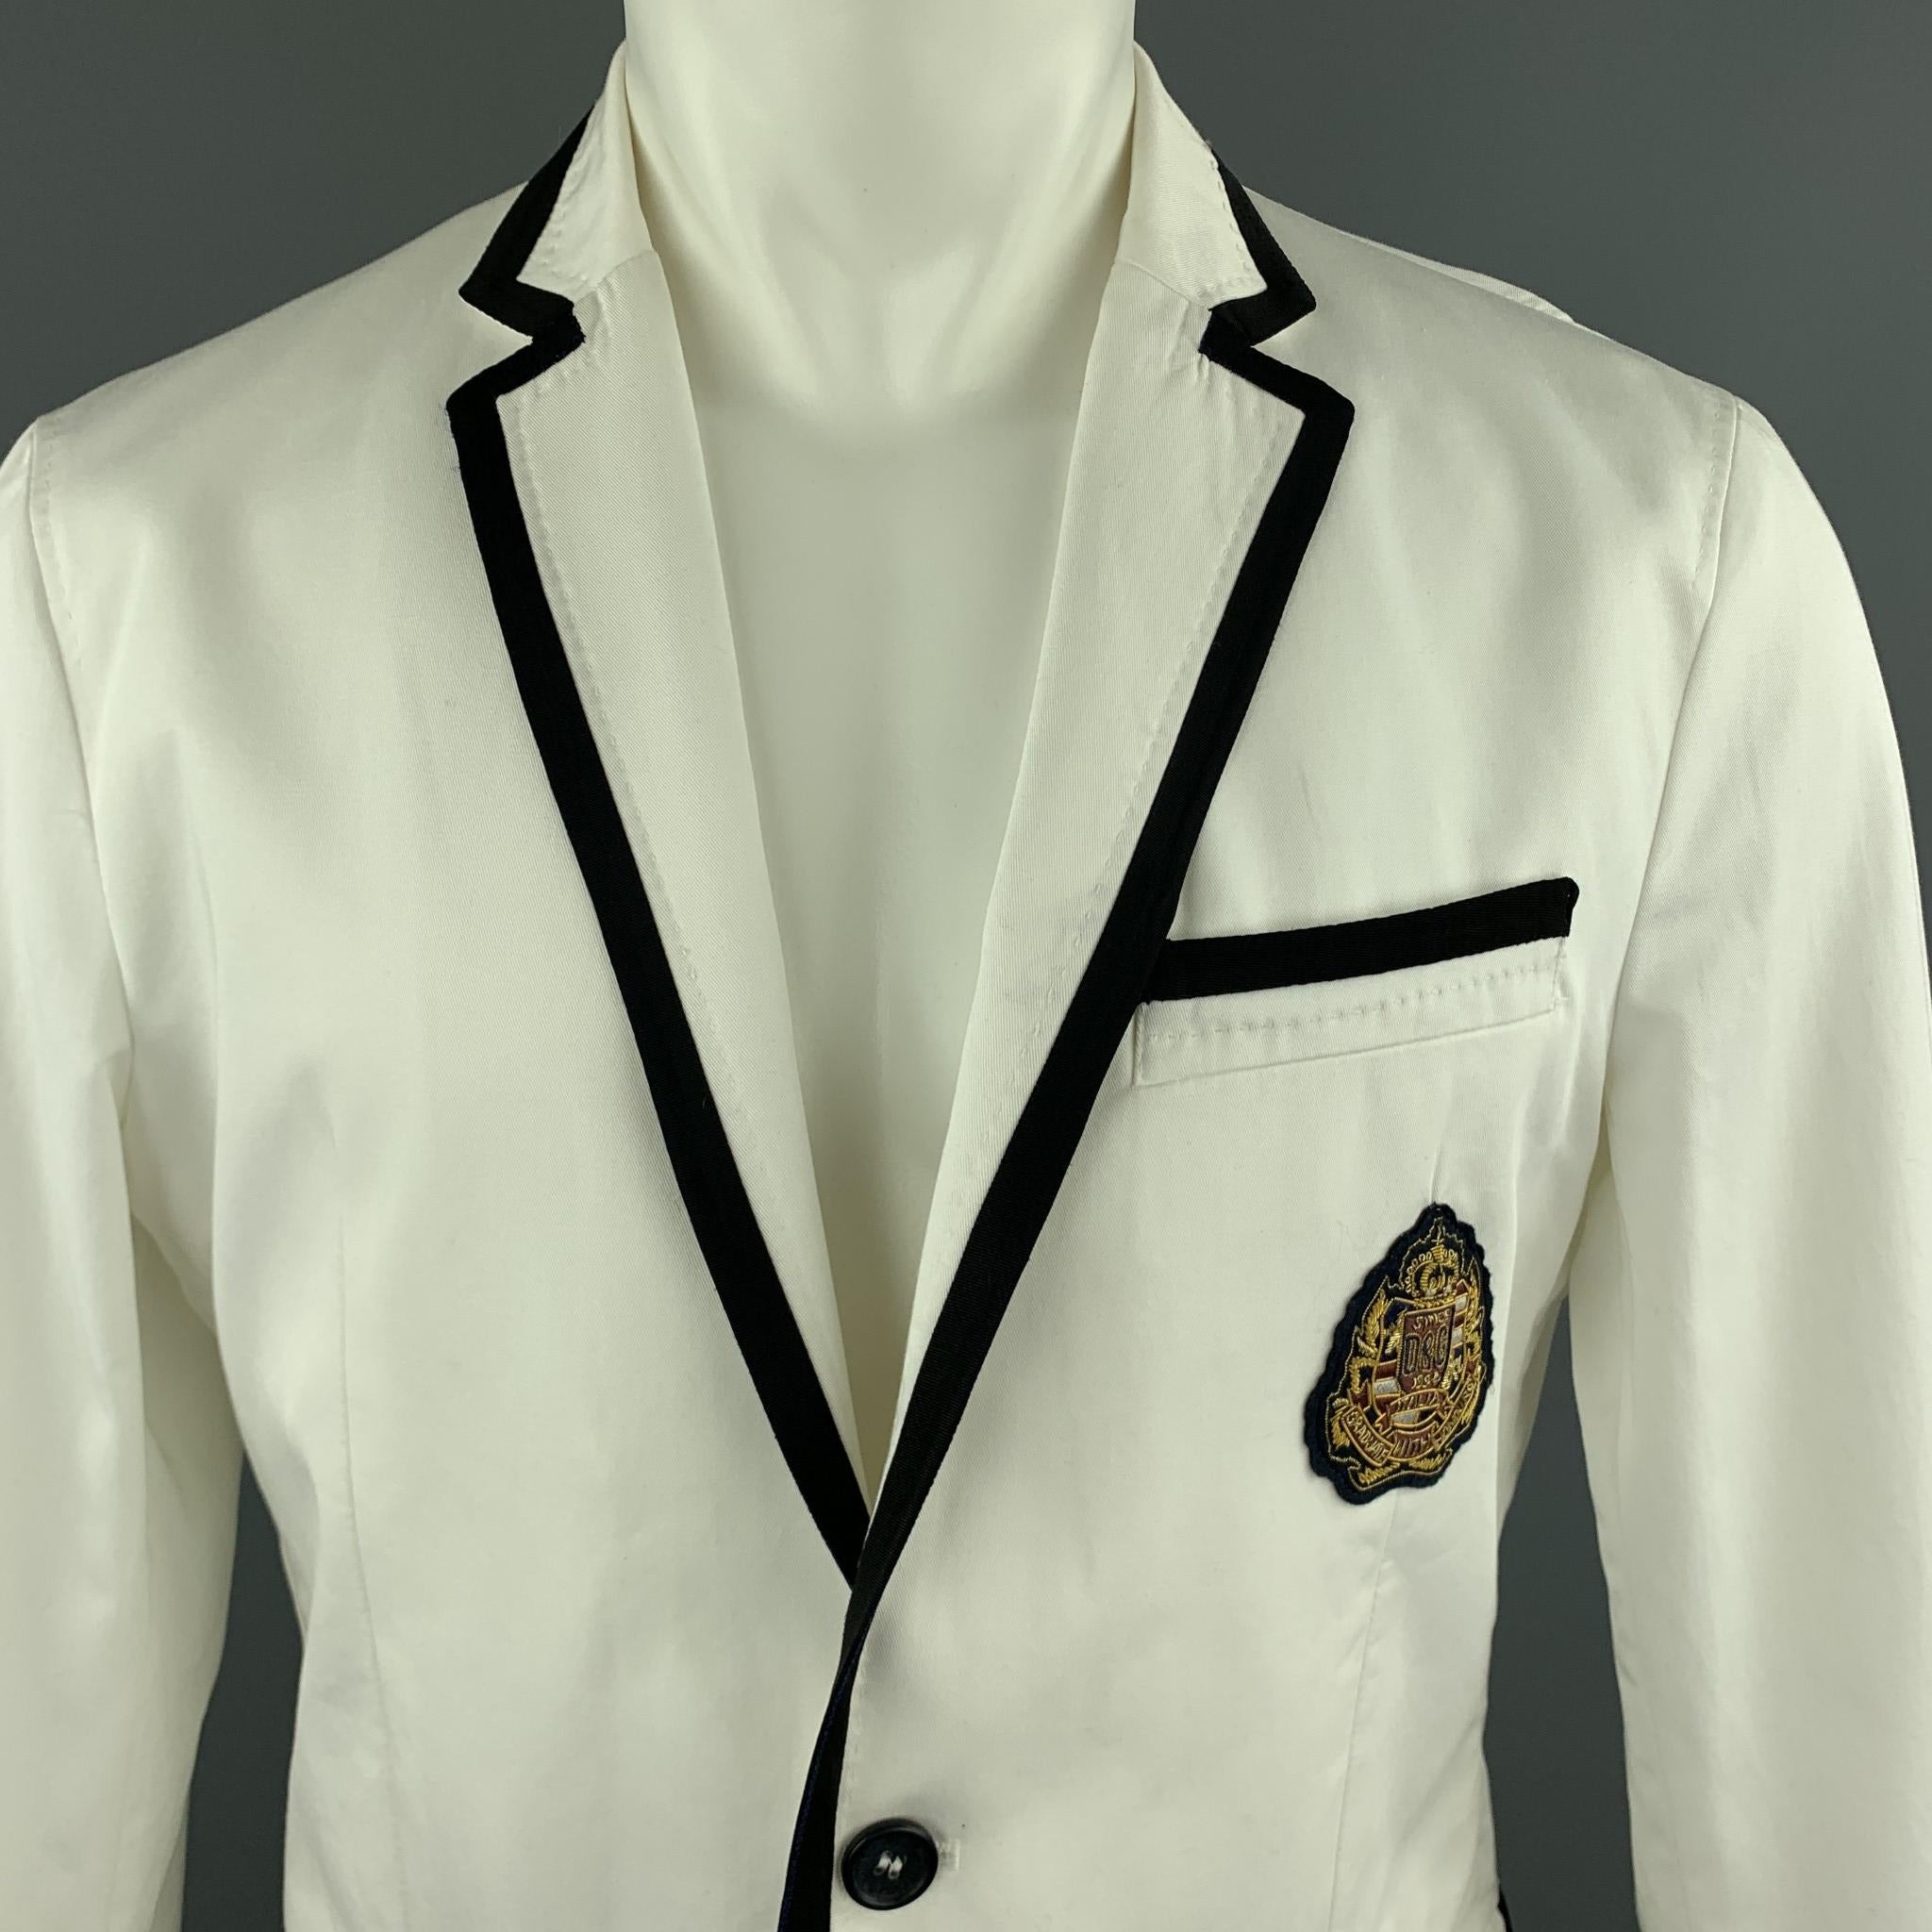 D&G by DOLCE & GABBANA blazer comes in light weight cotton blend twill with a notch lapel, single breasted, two button front, navy faille piping, and embroidered chest patch. Made in Italy.

Very Good Pre-Owned Condition.
Marked: IT